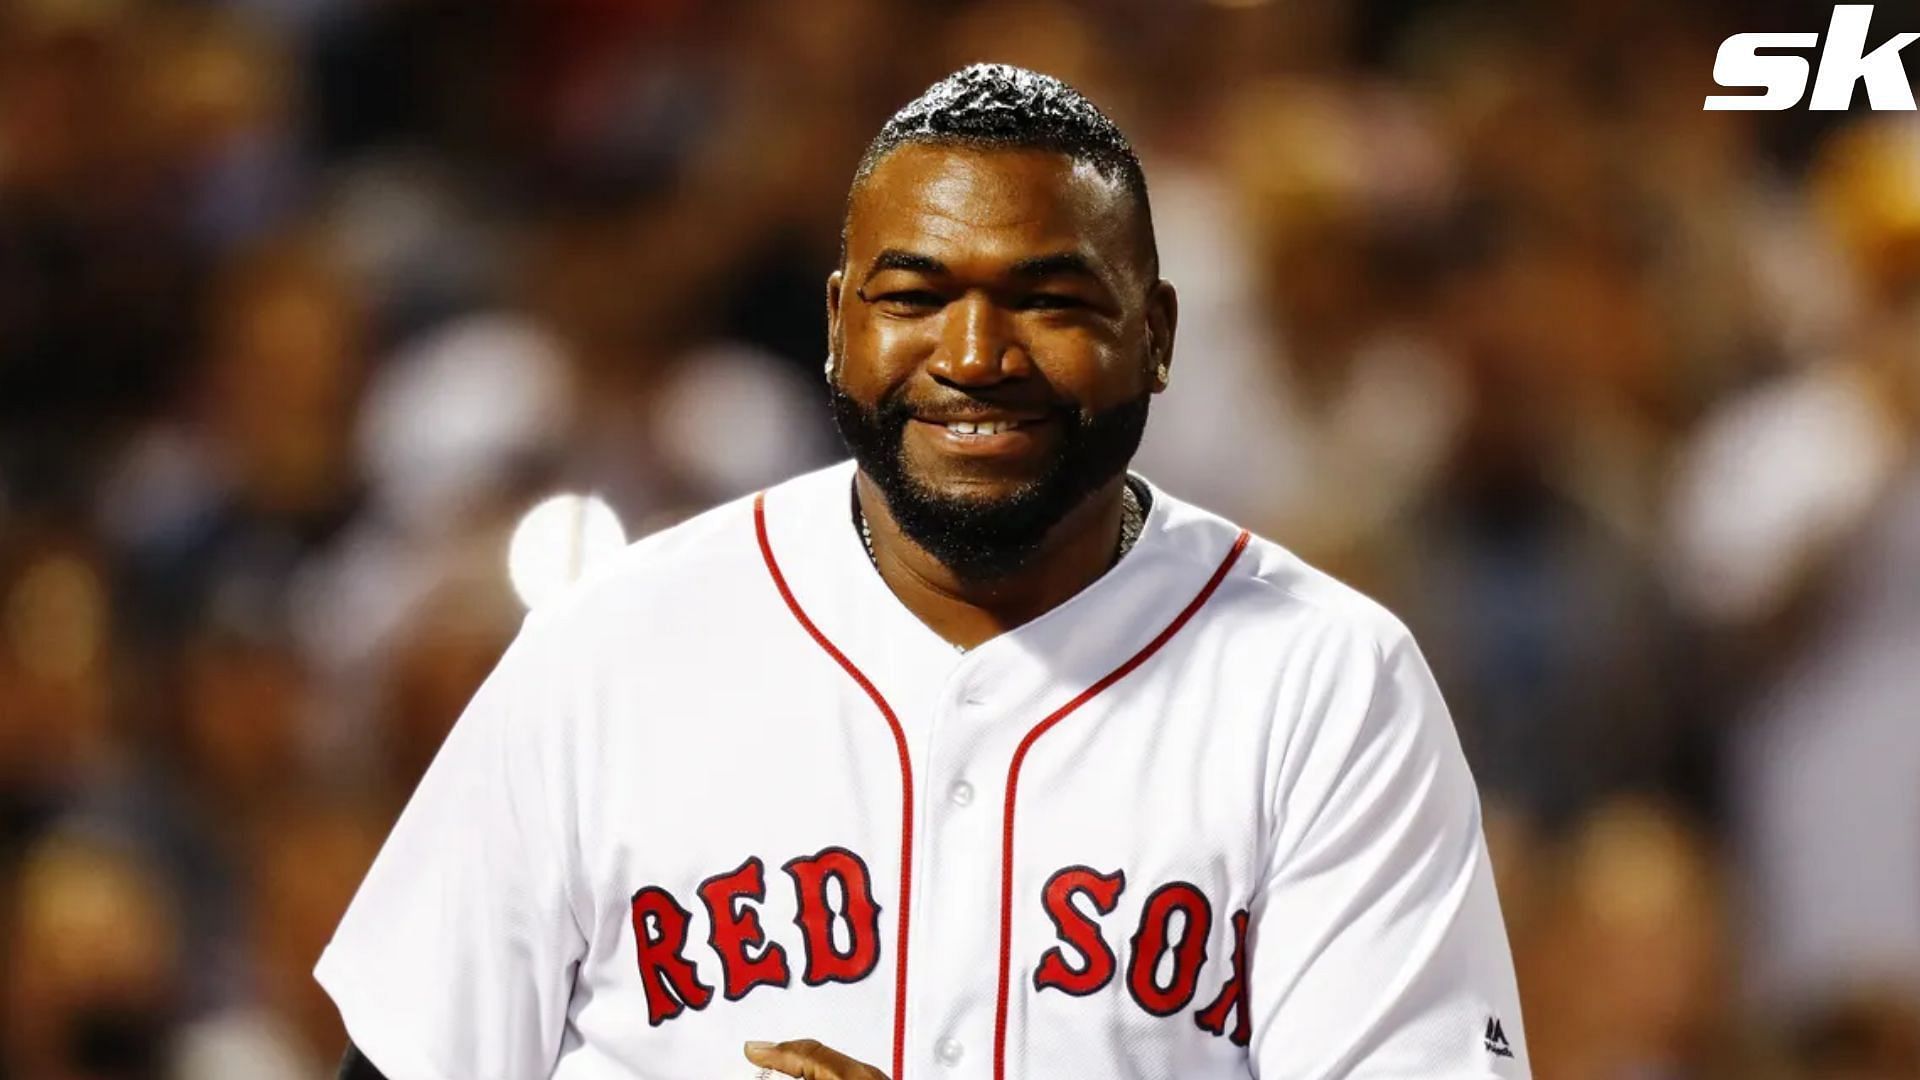 Former MLB star David Ortiz was inducted into the Hall of Fame.